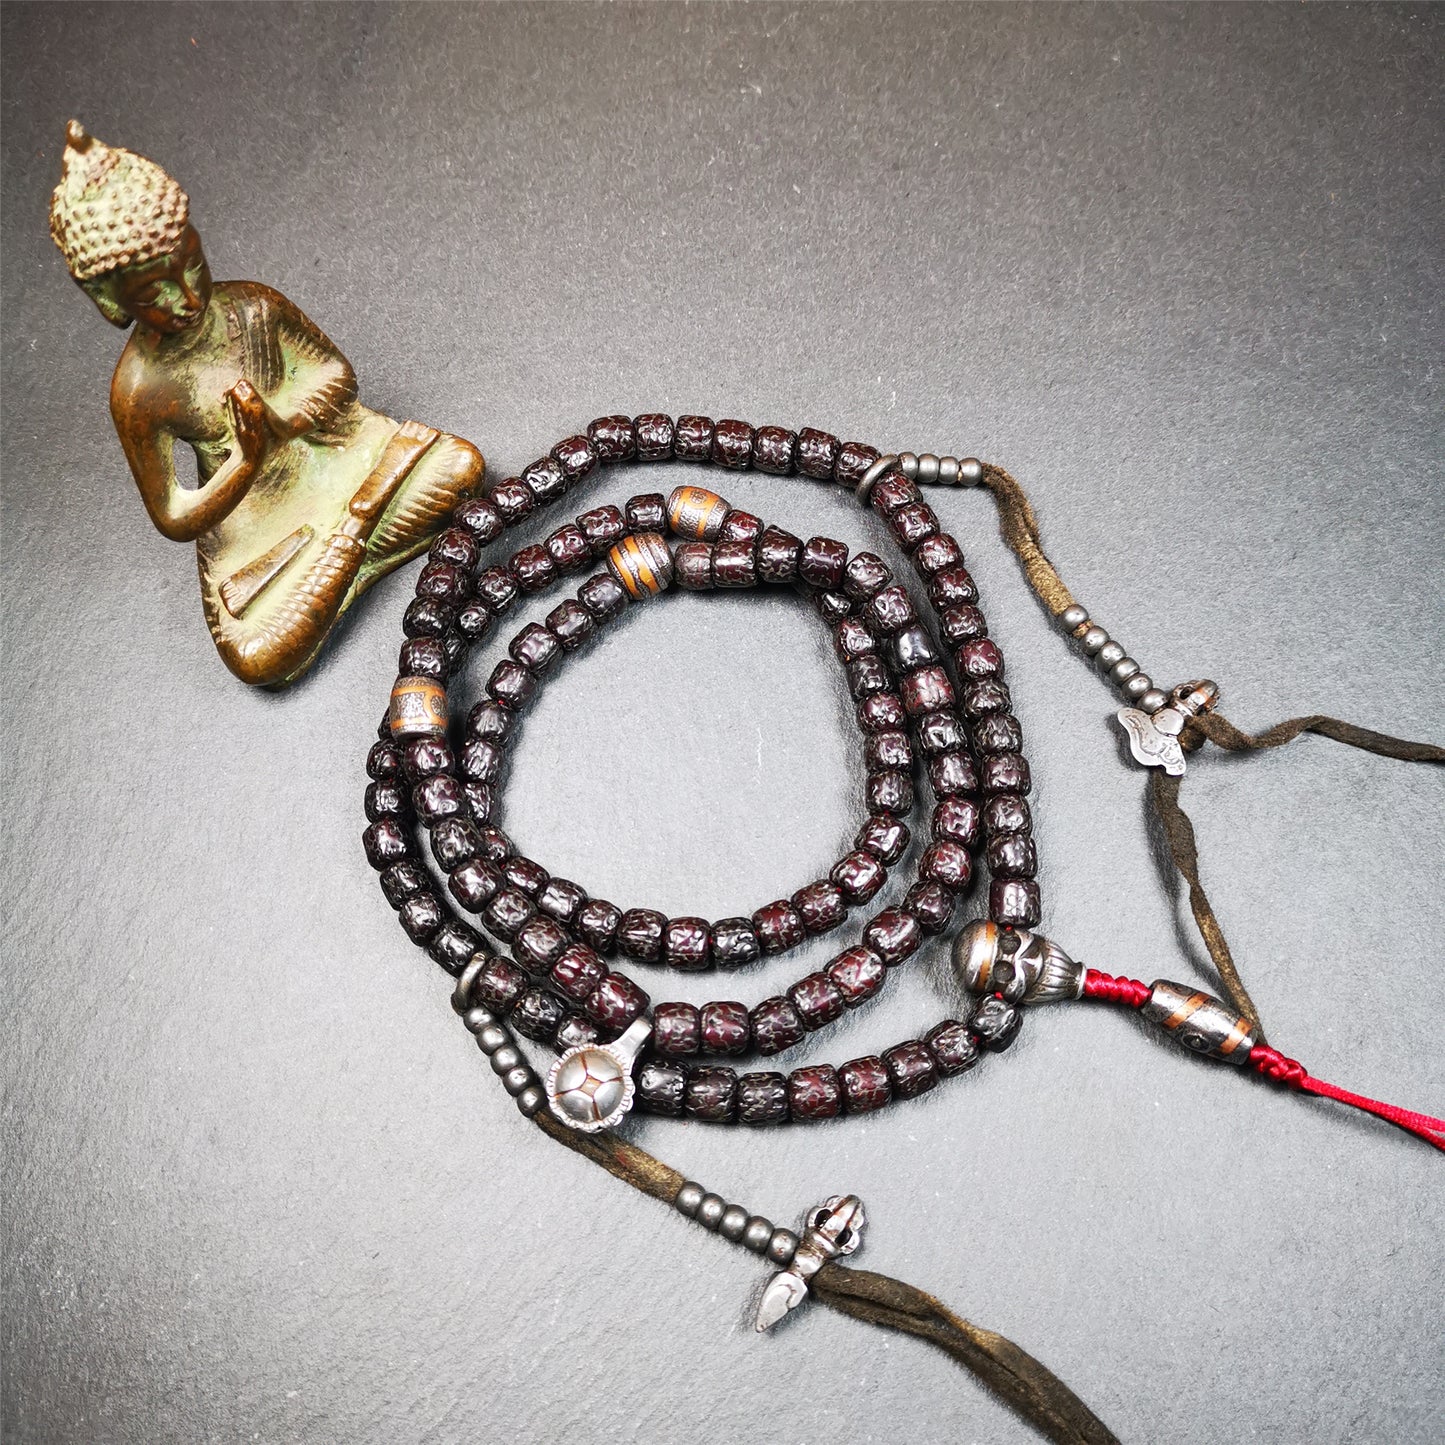 This old rudraksha mala was handmade from tibetan crafts man in Baiyu County. It's composed of 108 pcs 8mm rudraksha beads,with cold iron beads,1 pair of bead counters,guru bead,and dzi bead pendant.